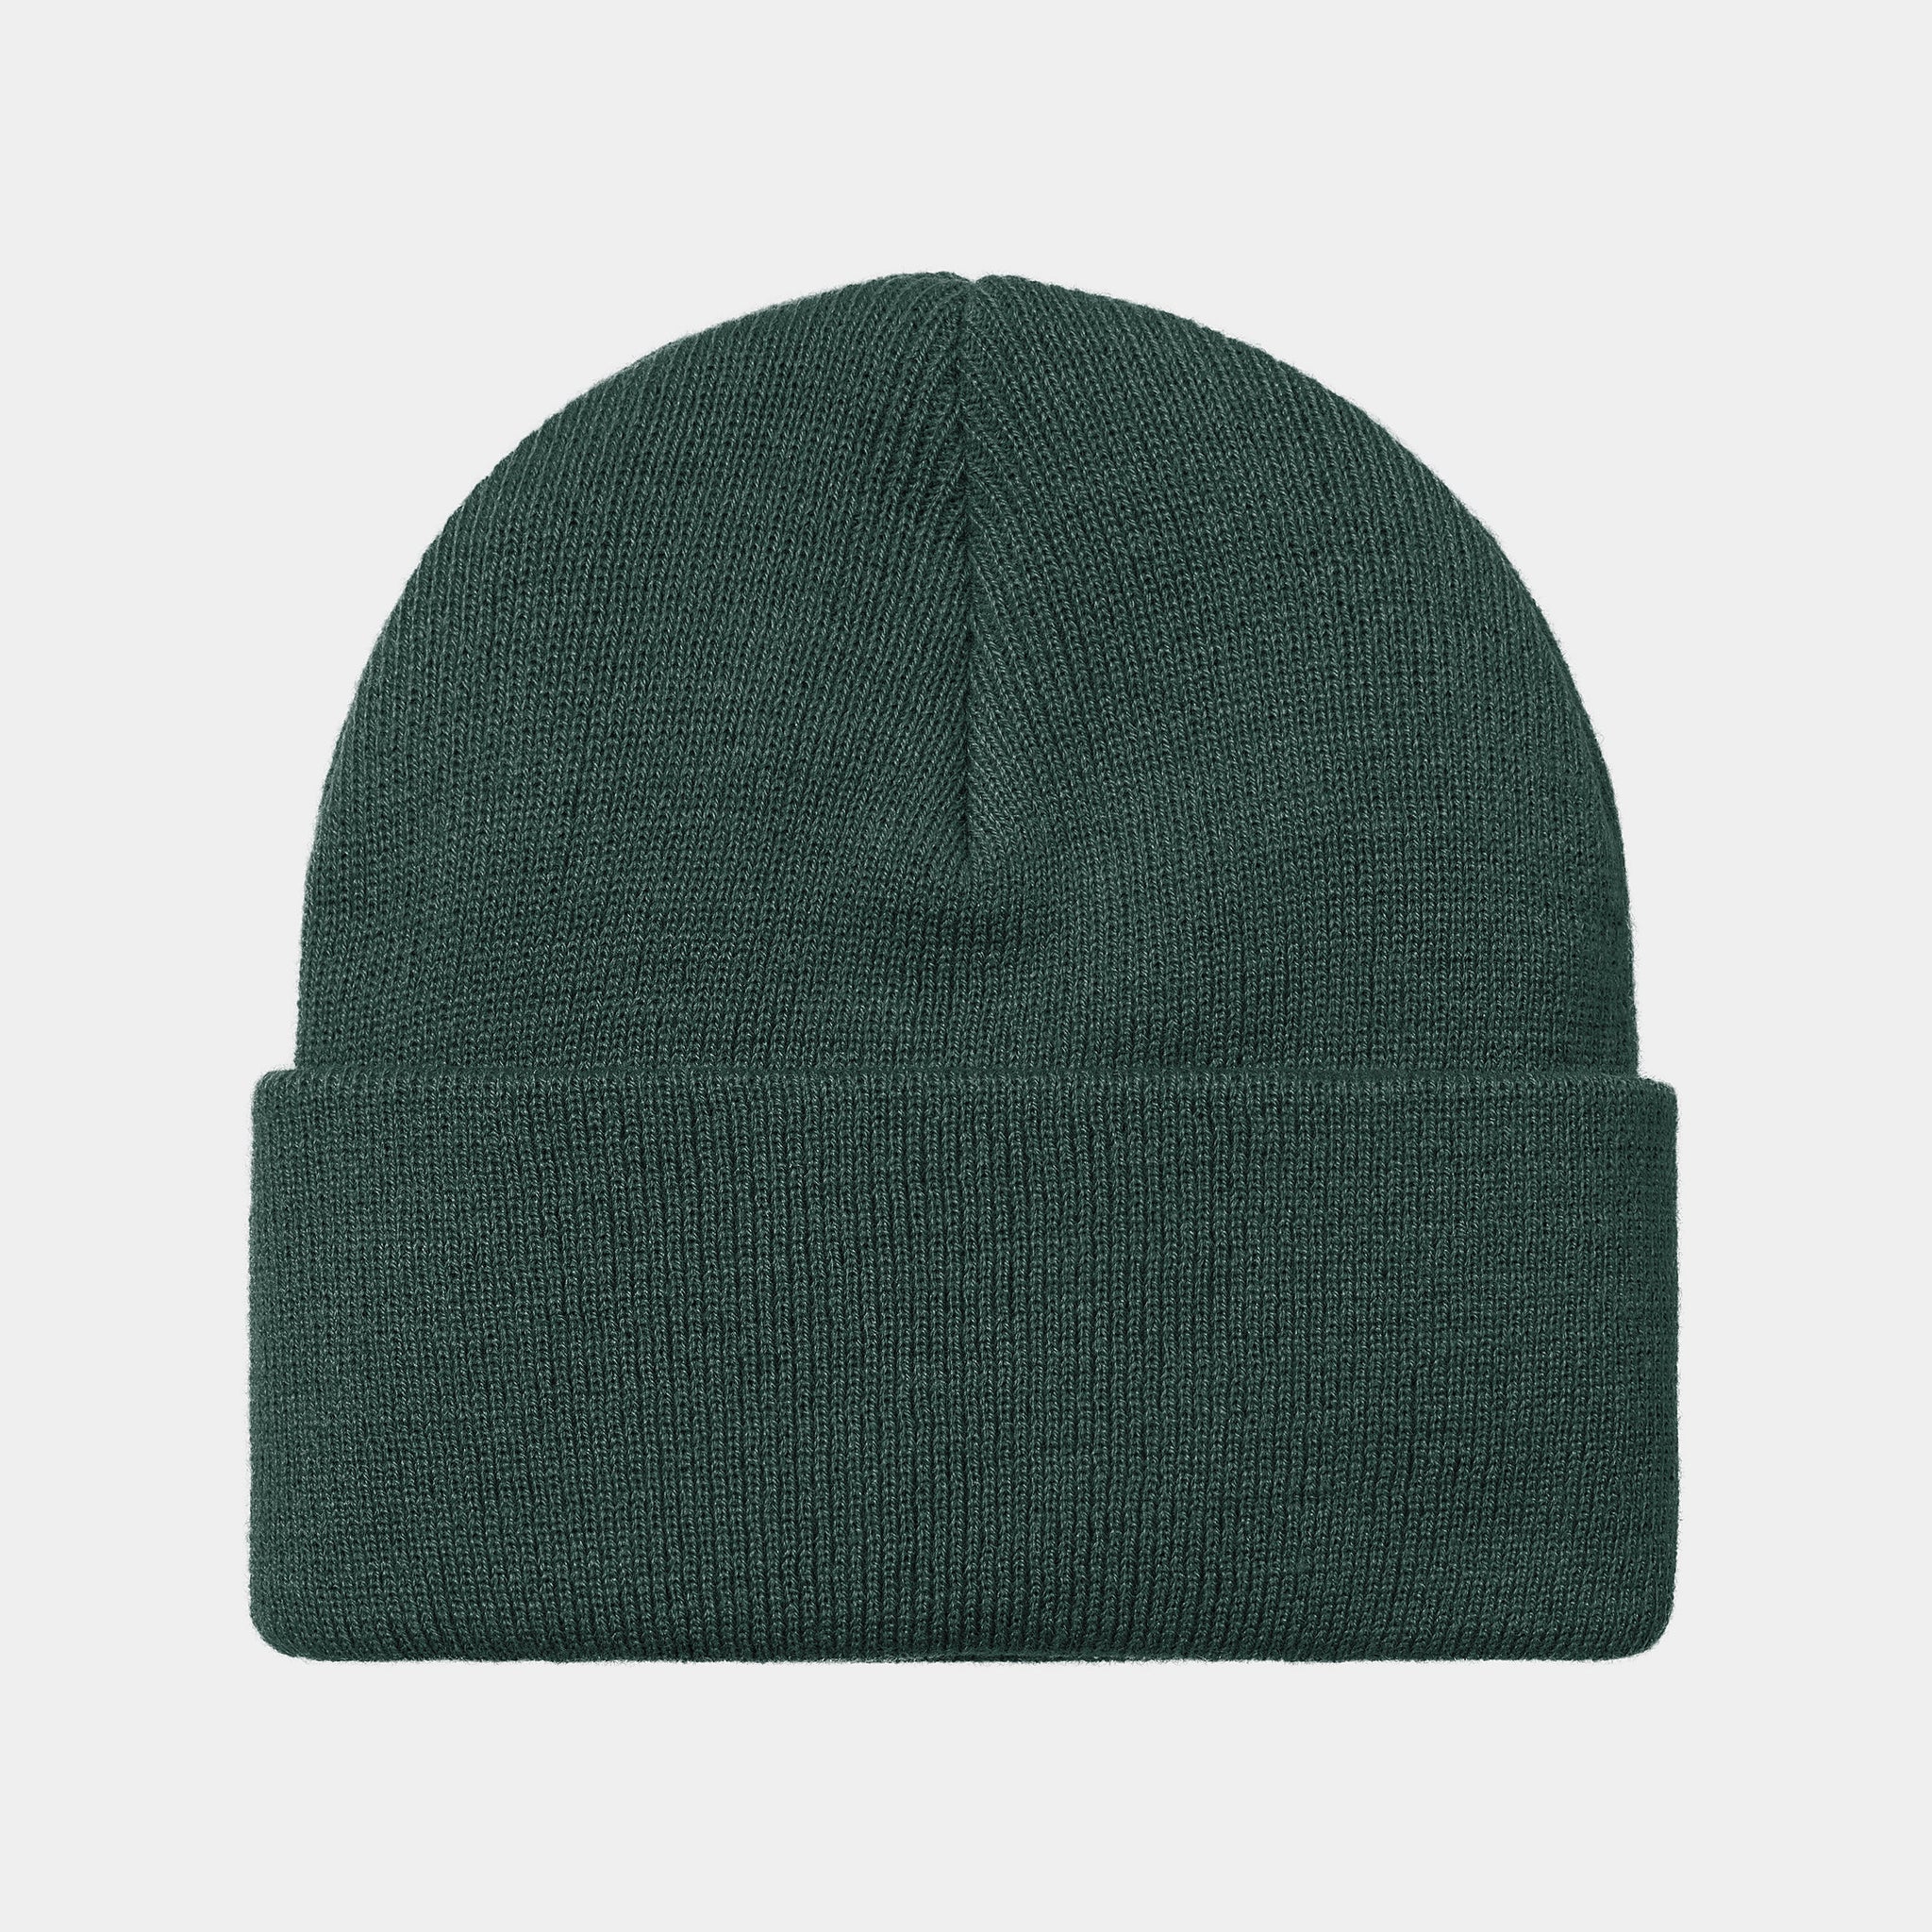 Chase Beanie - Discovery Green/Gold